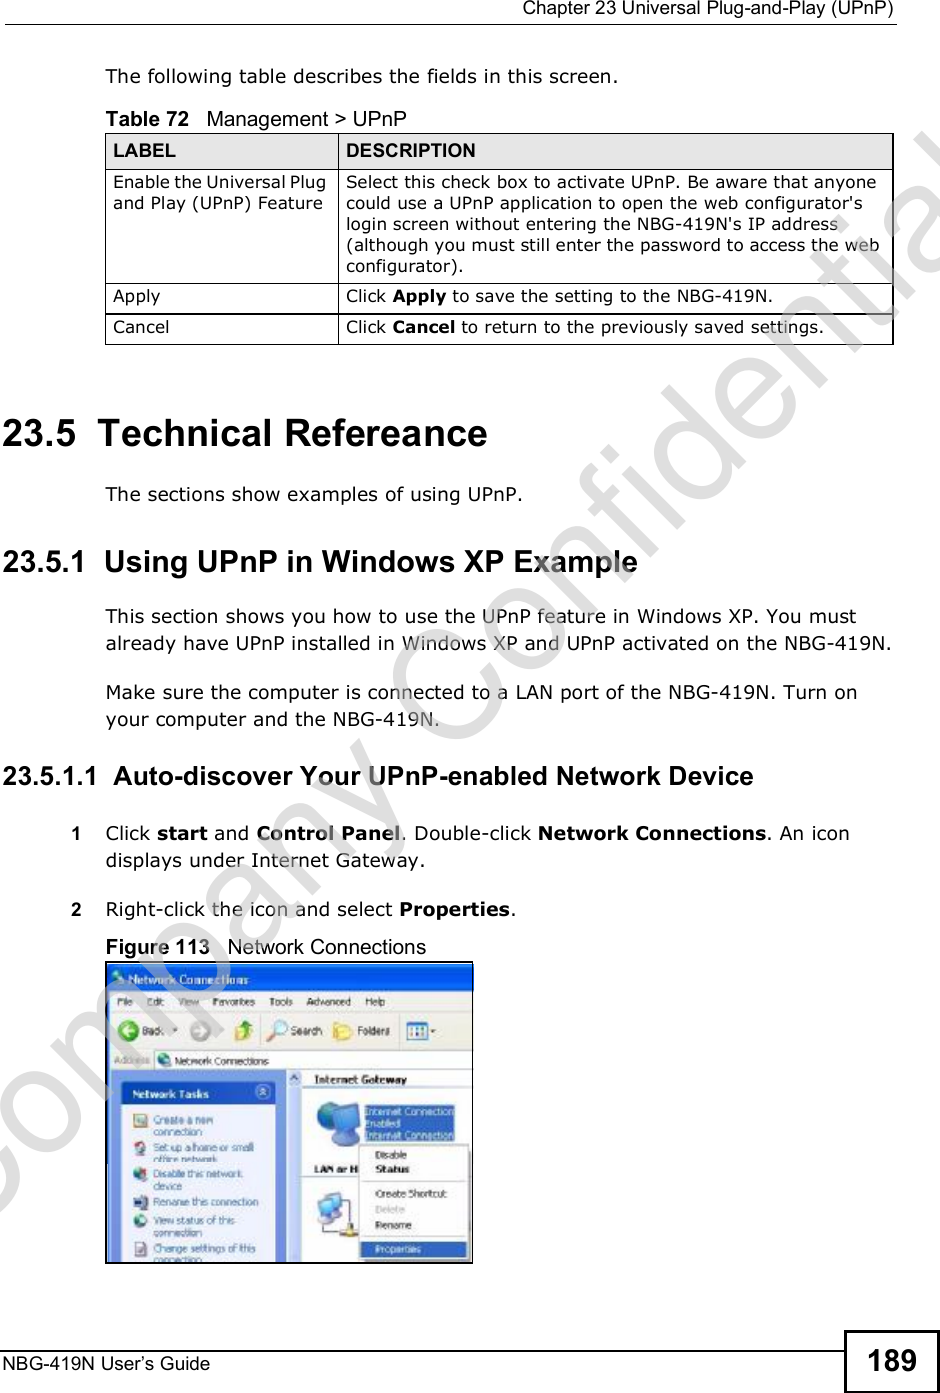  Chapter 23Universal Plug-and-Play (UPnP)NBG-419N User s Guide 189The following table describes the fields in this screen.23.5  Technical RefereanceThe sections show examples of using UPnP.  23.5.1  Using UPnP in Windows XP ExampleThis section shows you how to use the UPnP feature in Windows XP. You must already have UPnP installed in Windows XP and UPnP activated on the NBG-419N.Make sure the computer is connected to a LAN port of the NBG-419N. Turn on your computer and the NBG-419N. 23.5.1.1  Auto-discover Your UPnP-enabled Network Device1Click start and Control Panel. Double-click Network Connections. An icon displays under Internet Gateway.2Right-click the icon and select Properties. Figure 113   Network ConnectionsTable 72   Management &gt; UPnPLABEL DESCRIPTIONEnable the Universal Plug and Play (UPnP) Feature Select this check box to activate UPnP. Be aware that anyone could use a UPnP application to open the web configurator&apos;s login screen without entering the NBG-419N&apos;s IP address (although you must still enter the password to access the web configurator).Apply Click Apply to save the setting to the NBG-419N.Cancel Click Cancel to return to the previously saved settings.Company Confidential